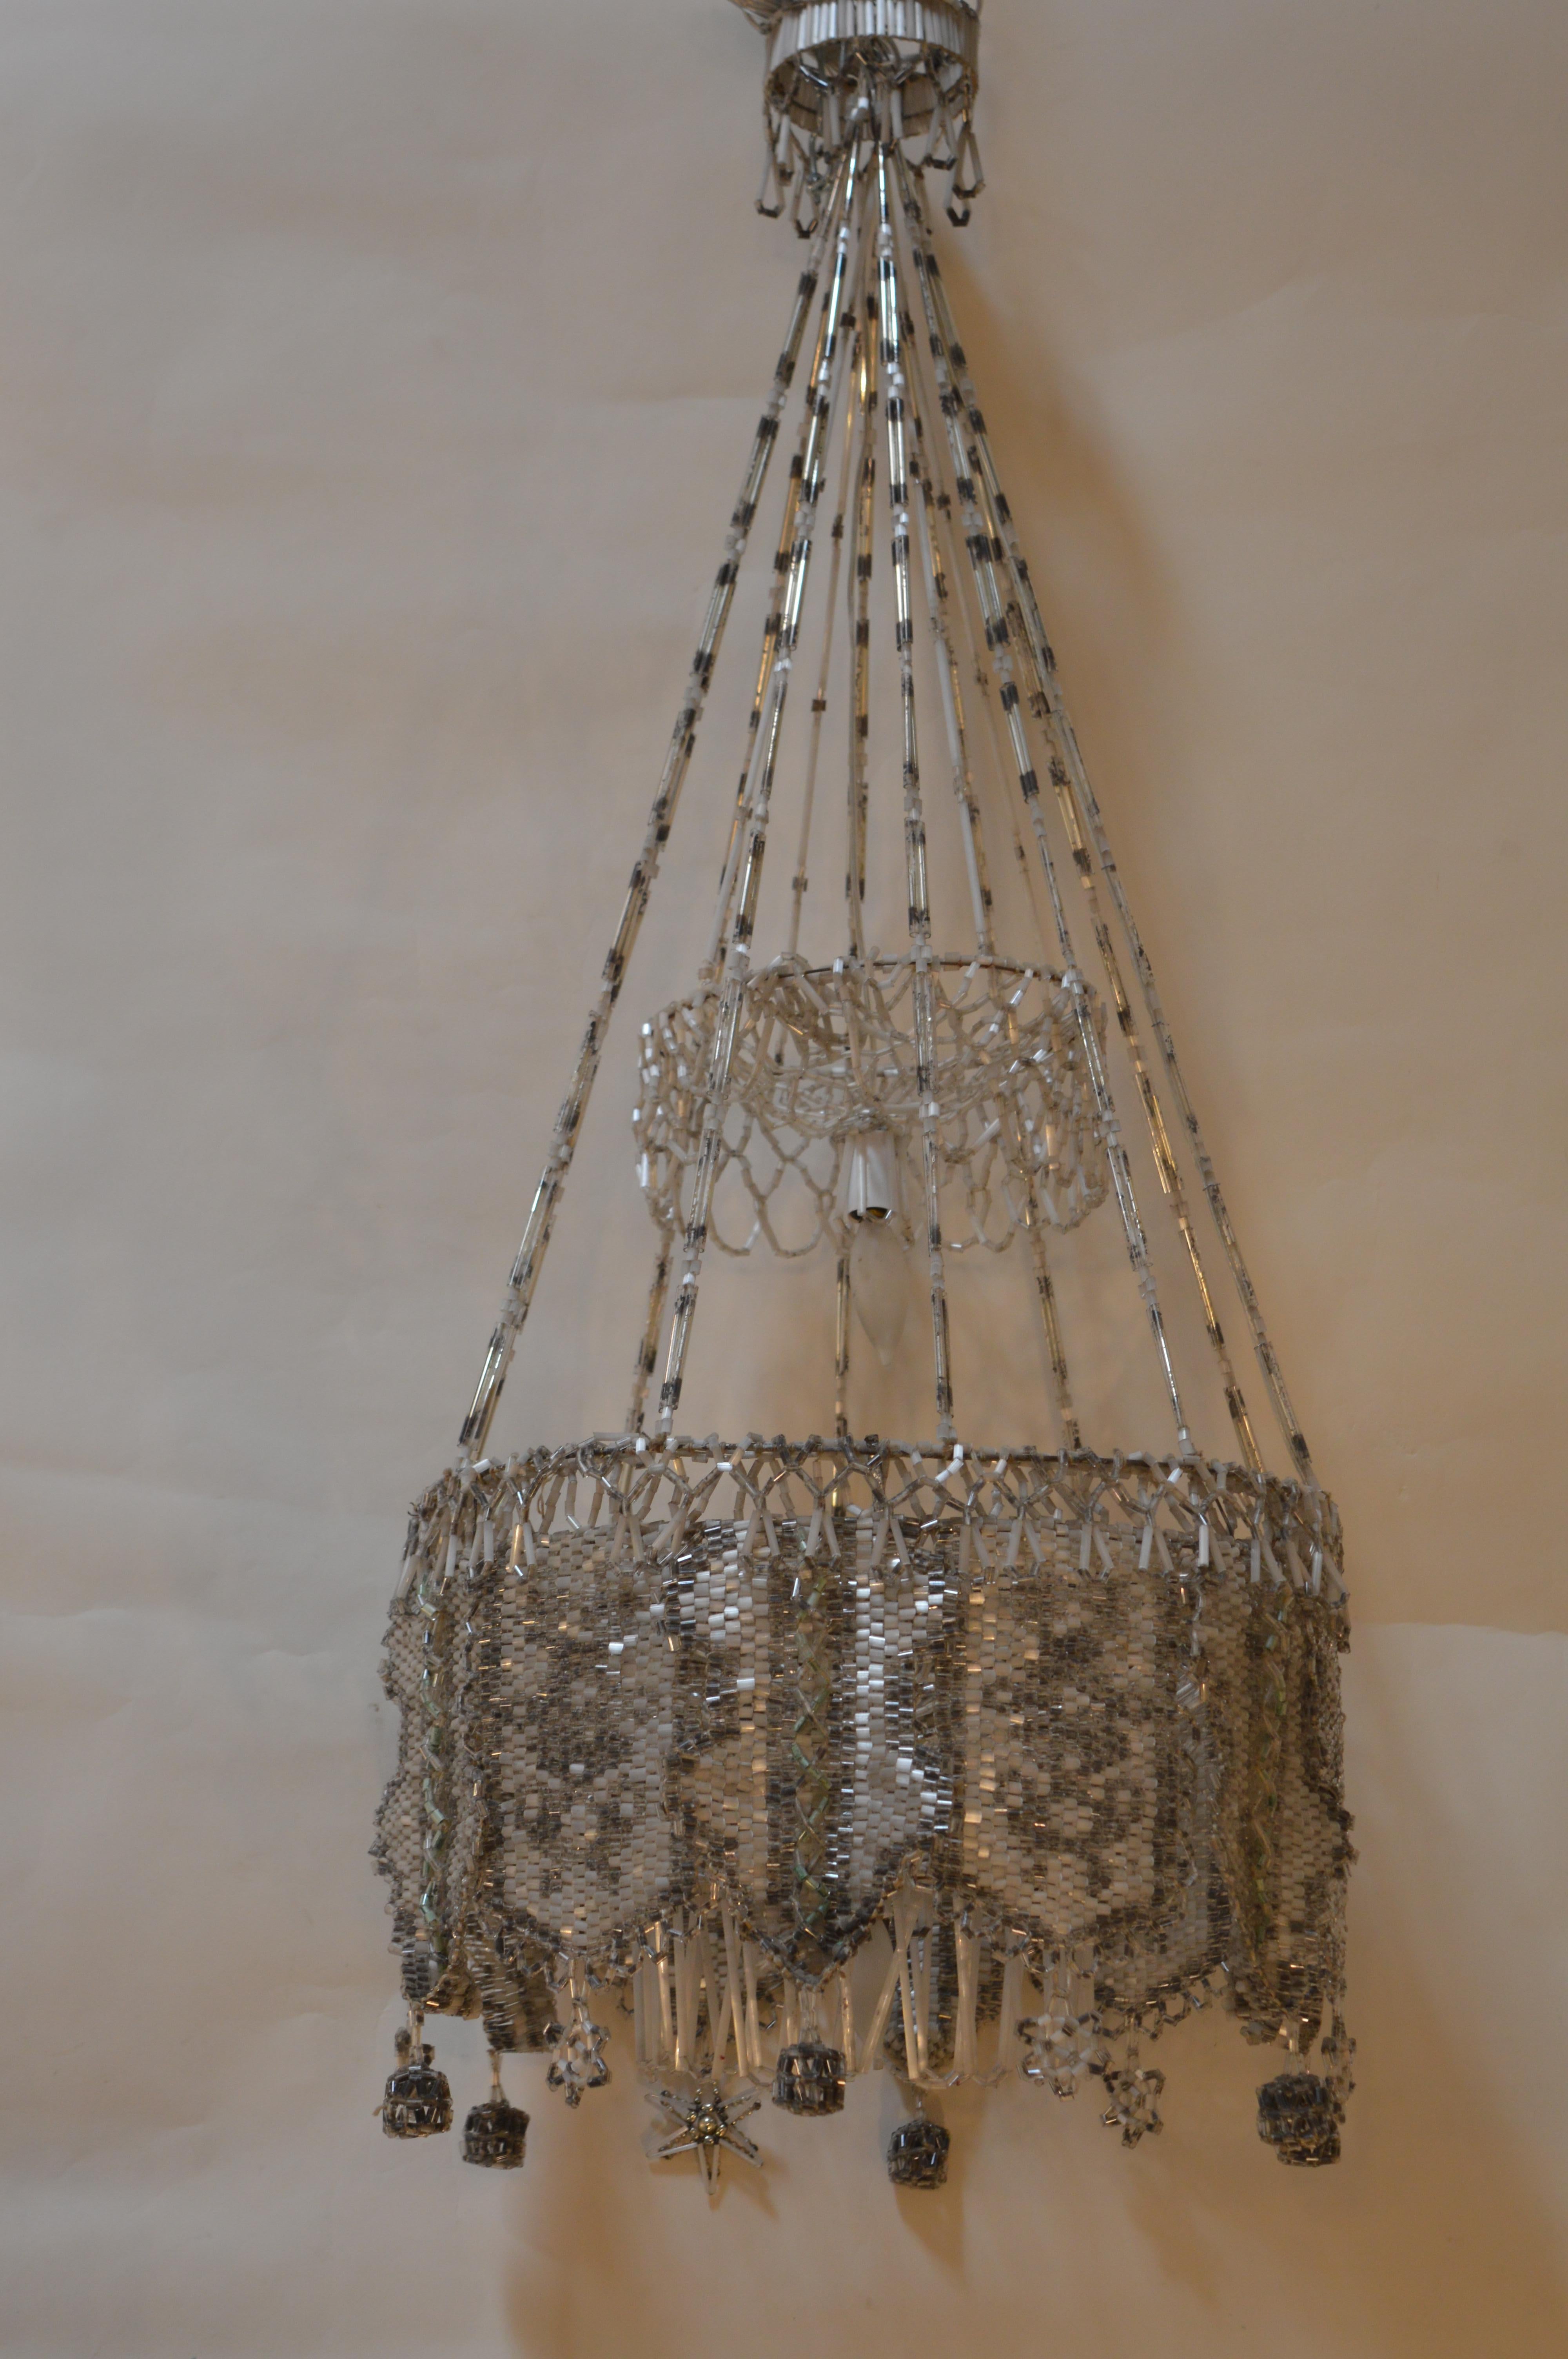 Intricately beaded chandelier from France.